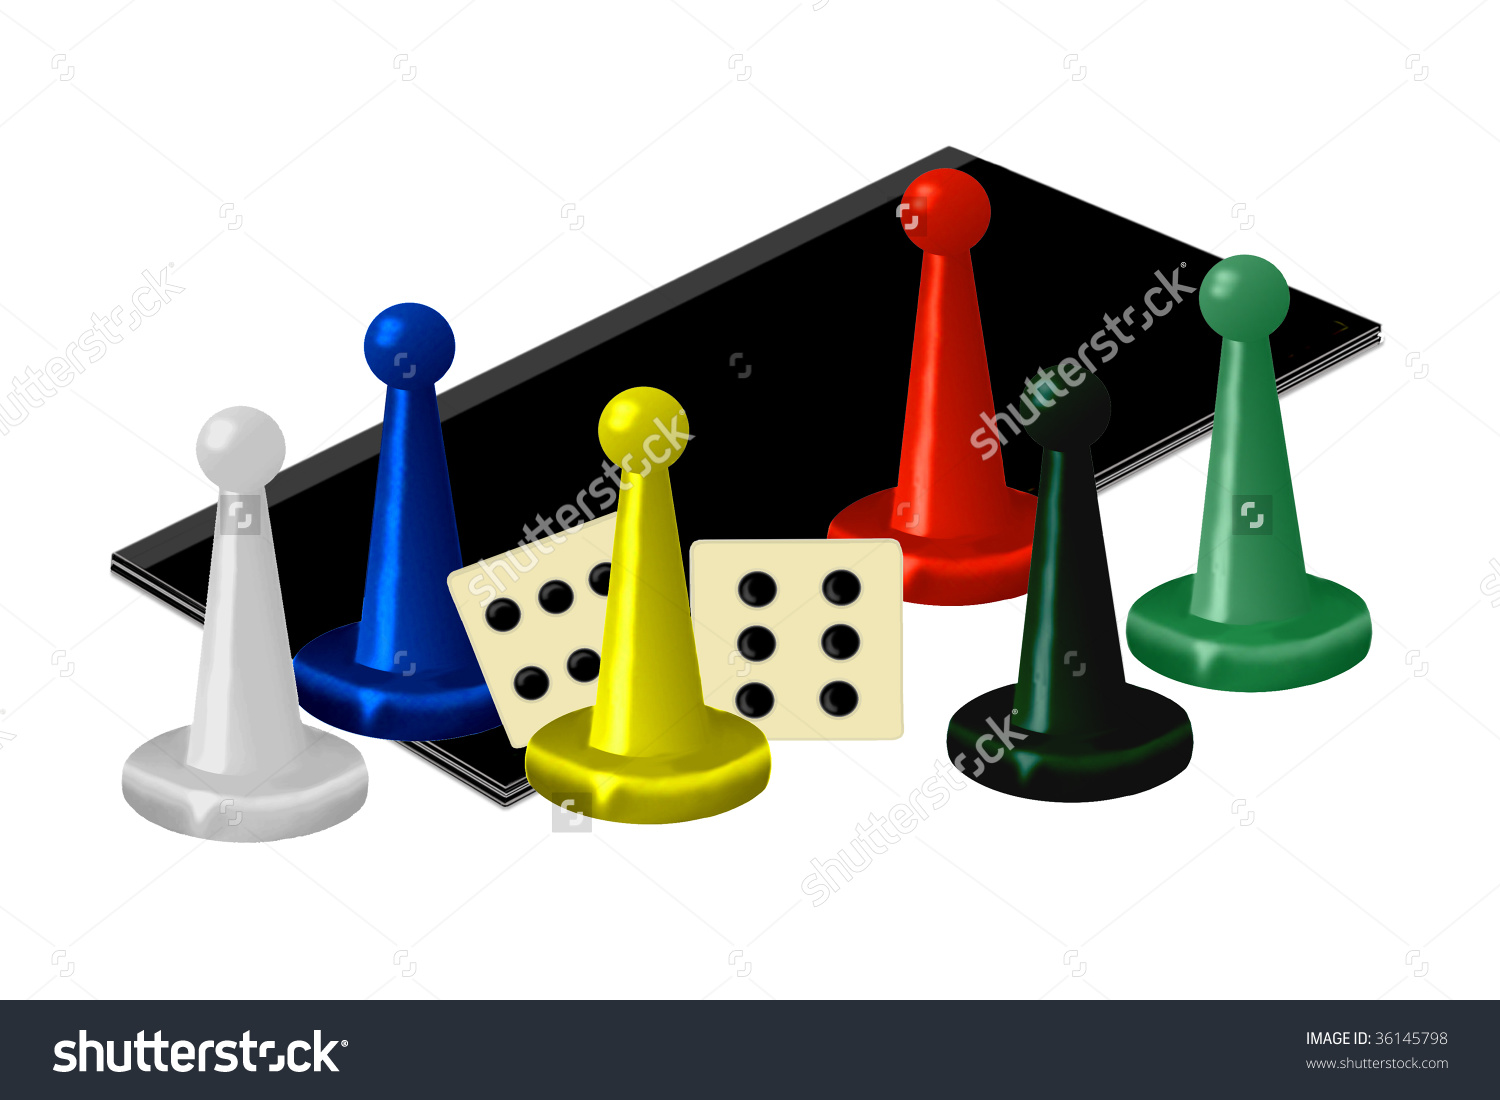 Family Game Night - Clipart of a game board, dice and brightly colored game pieces